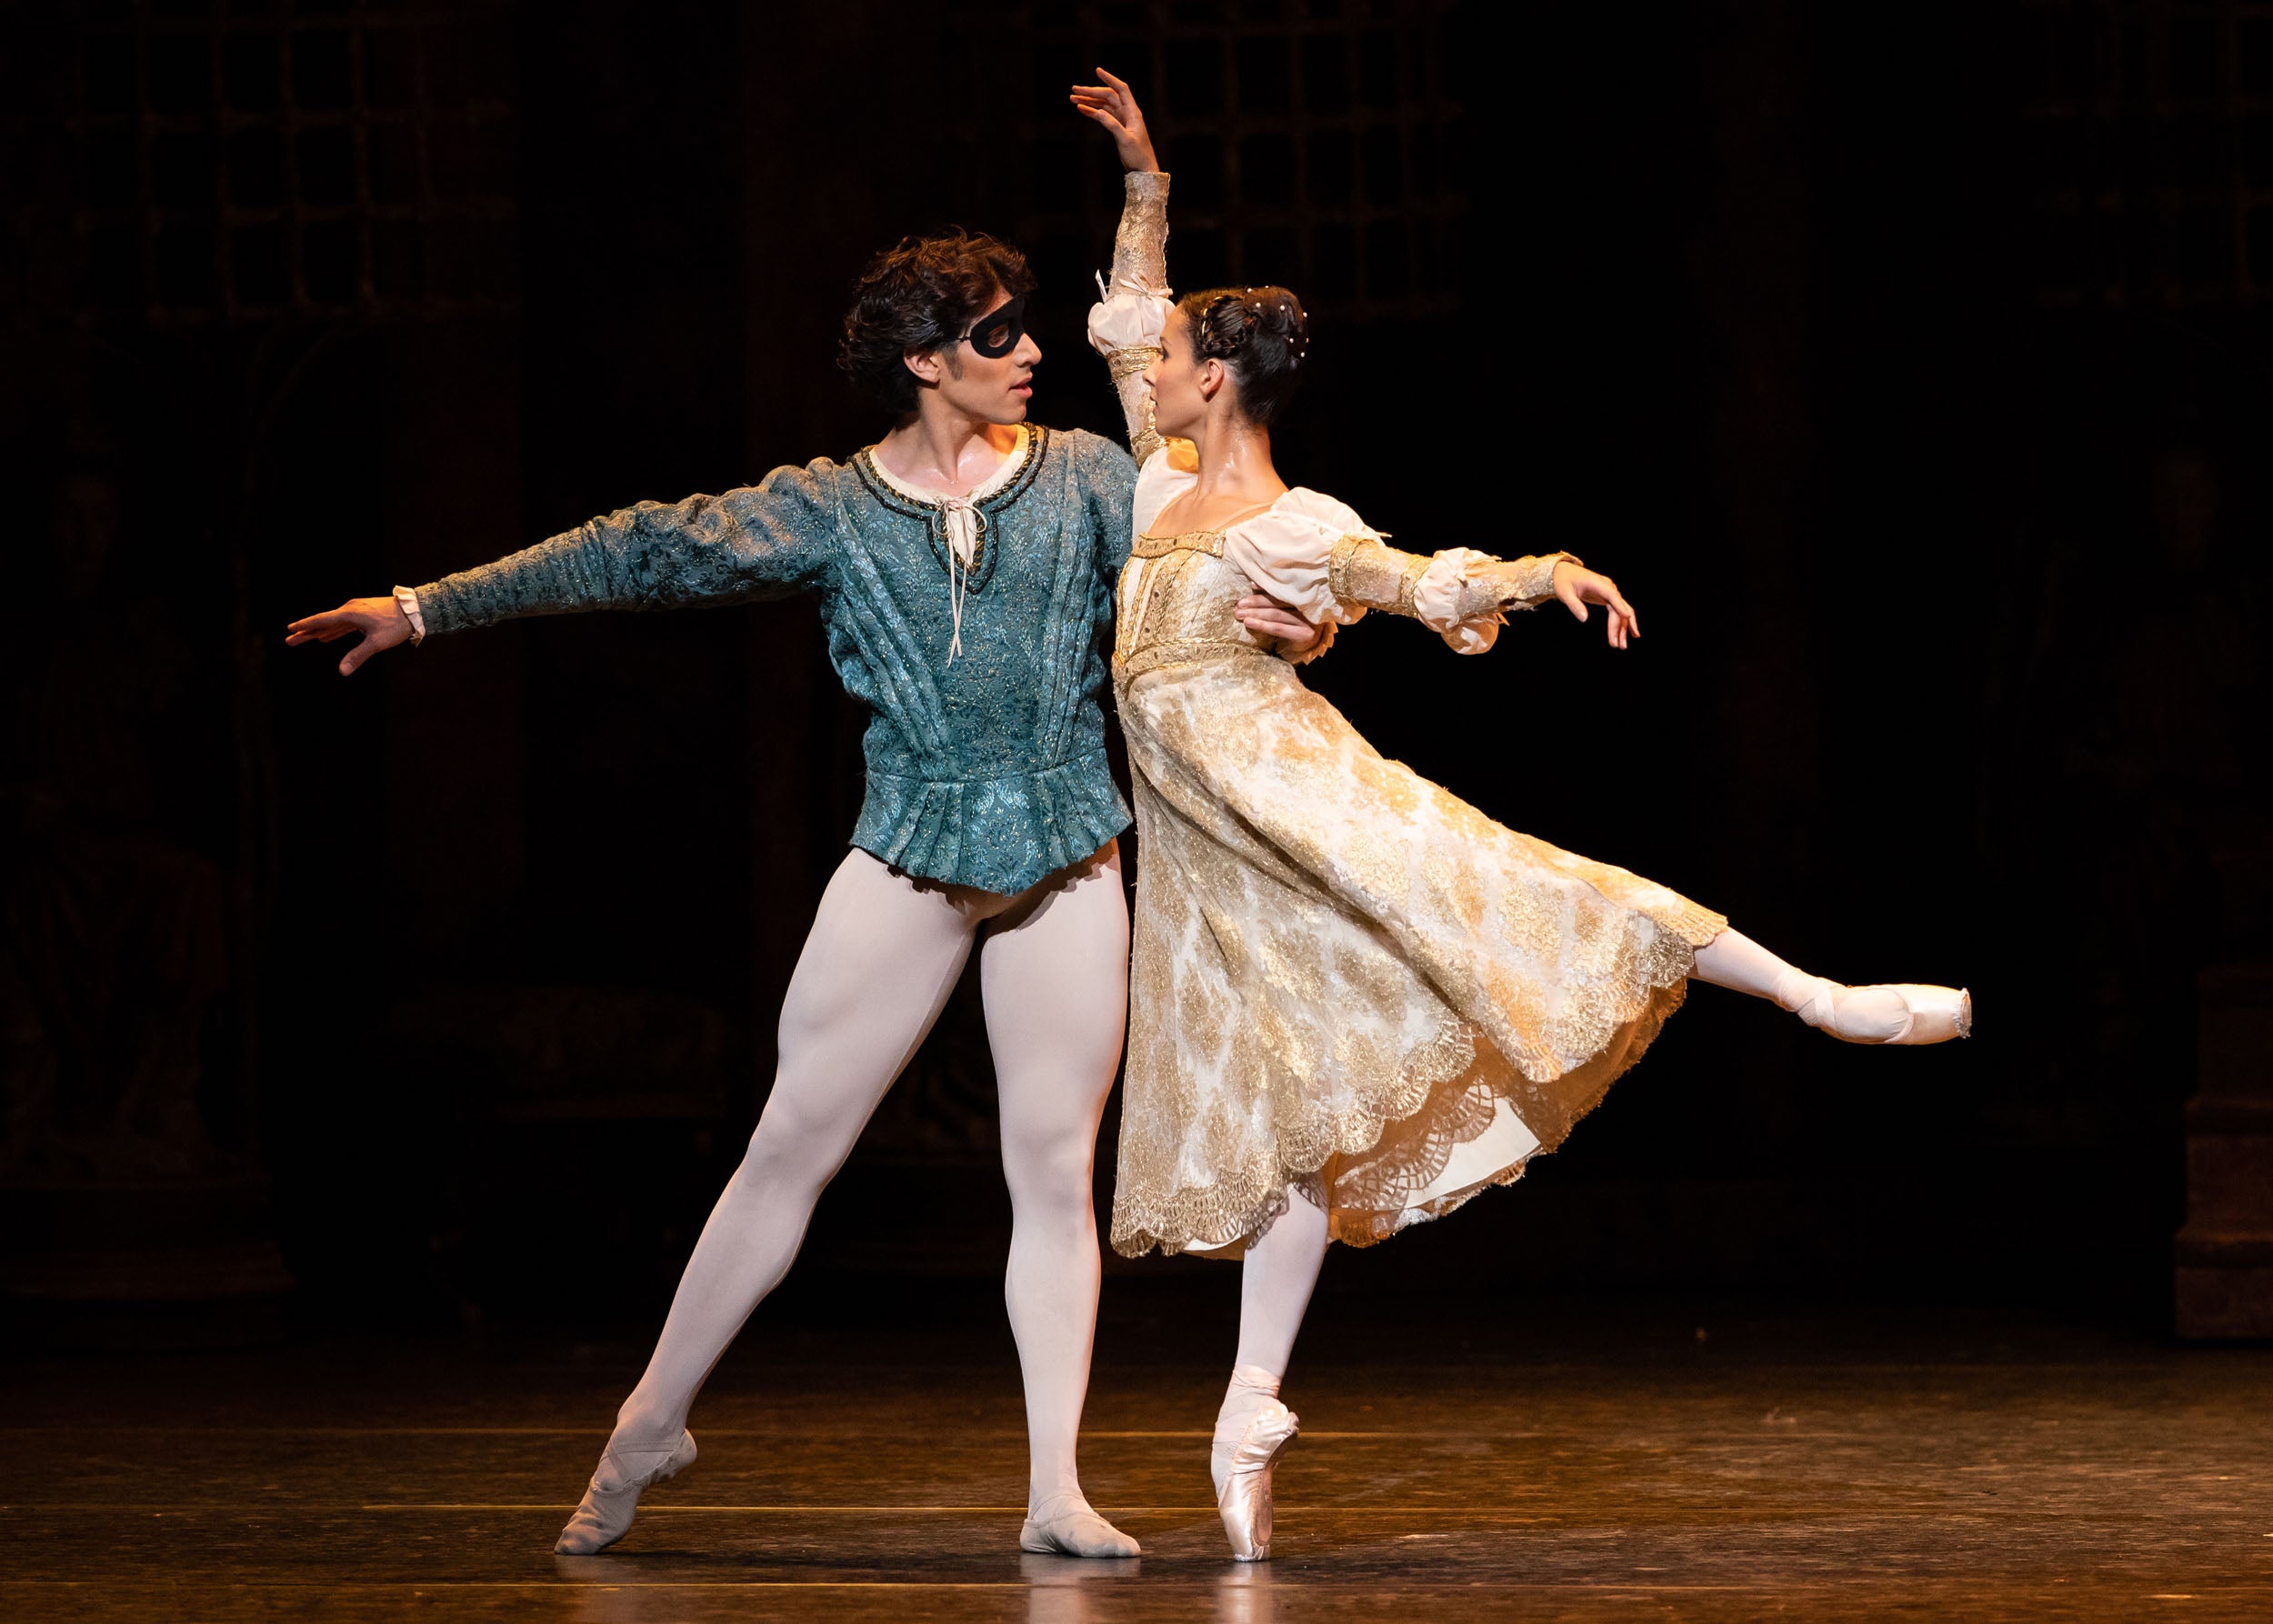 Cesar Corrales and Francesca Hayward as Romeo and Juliet